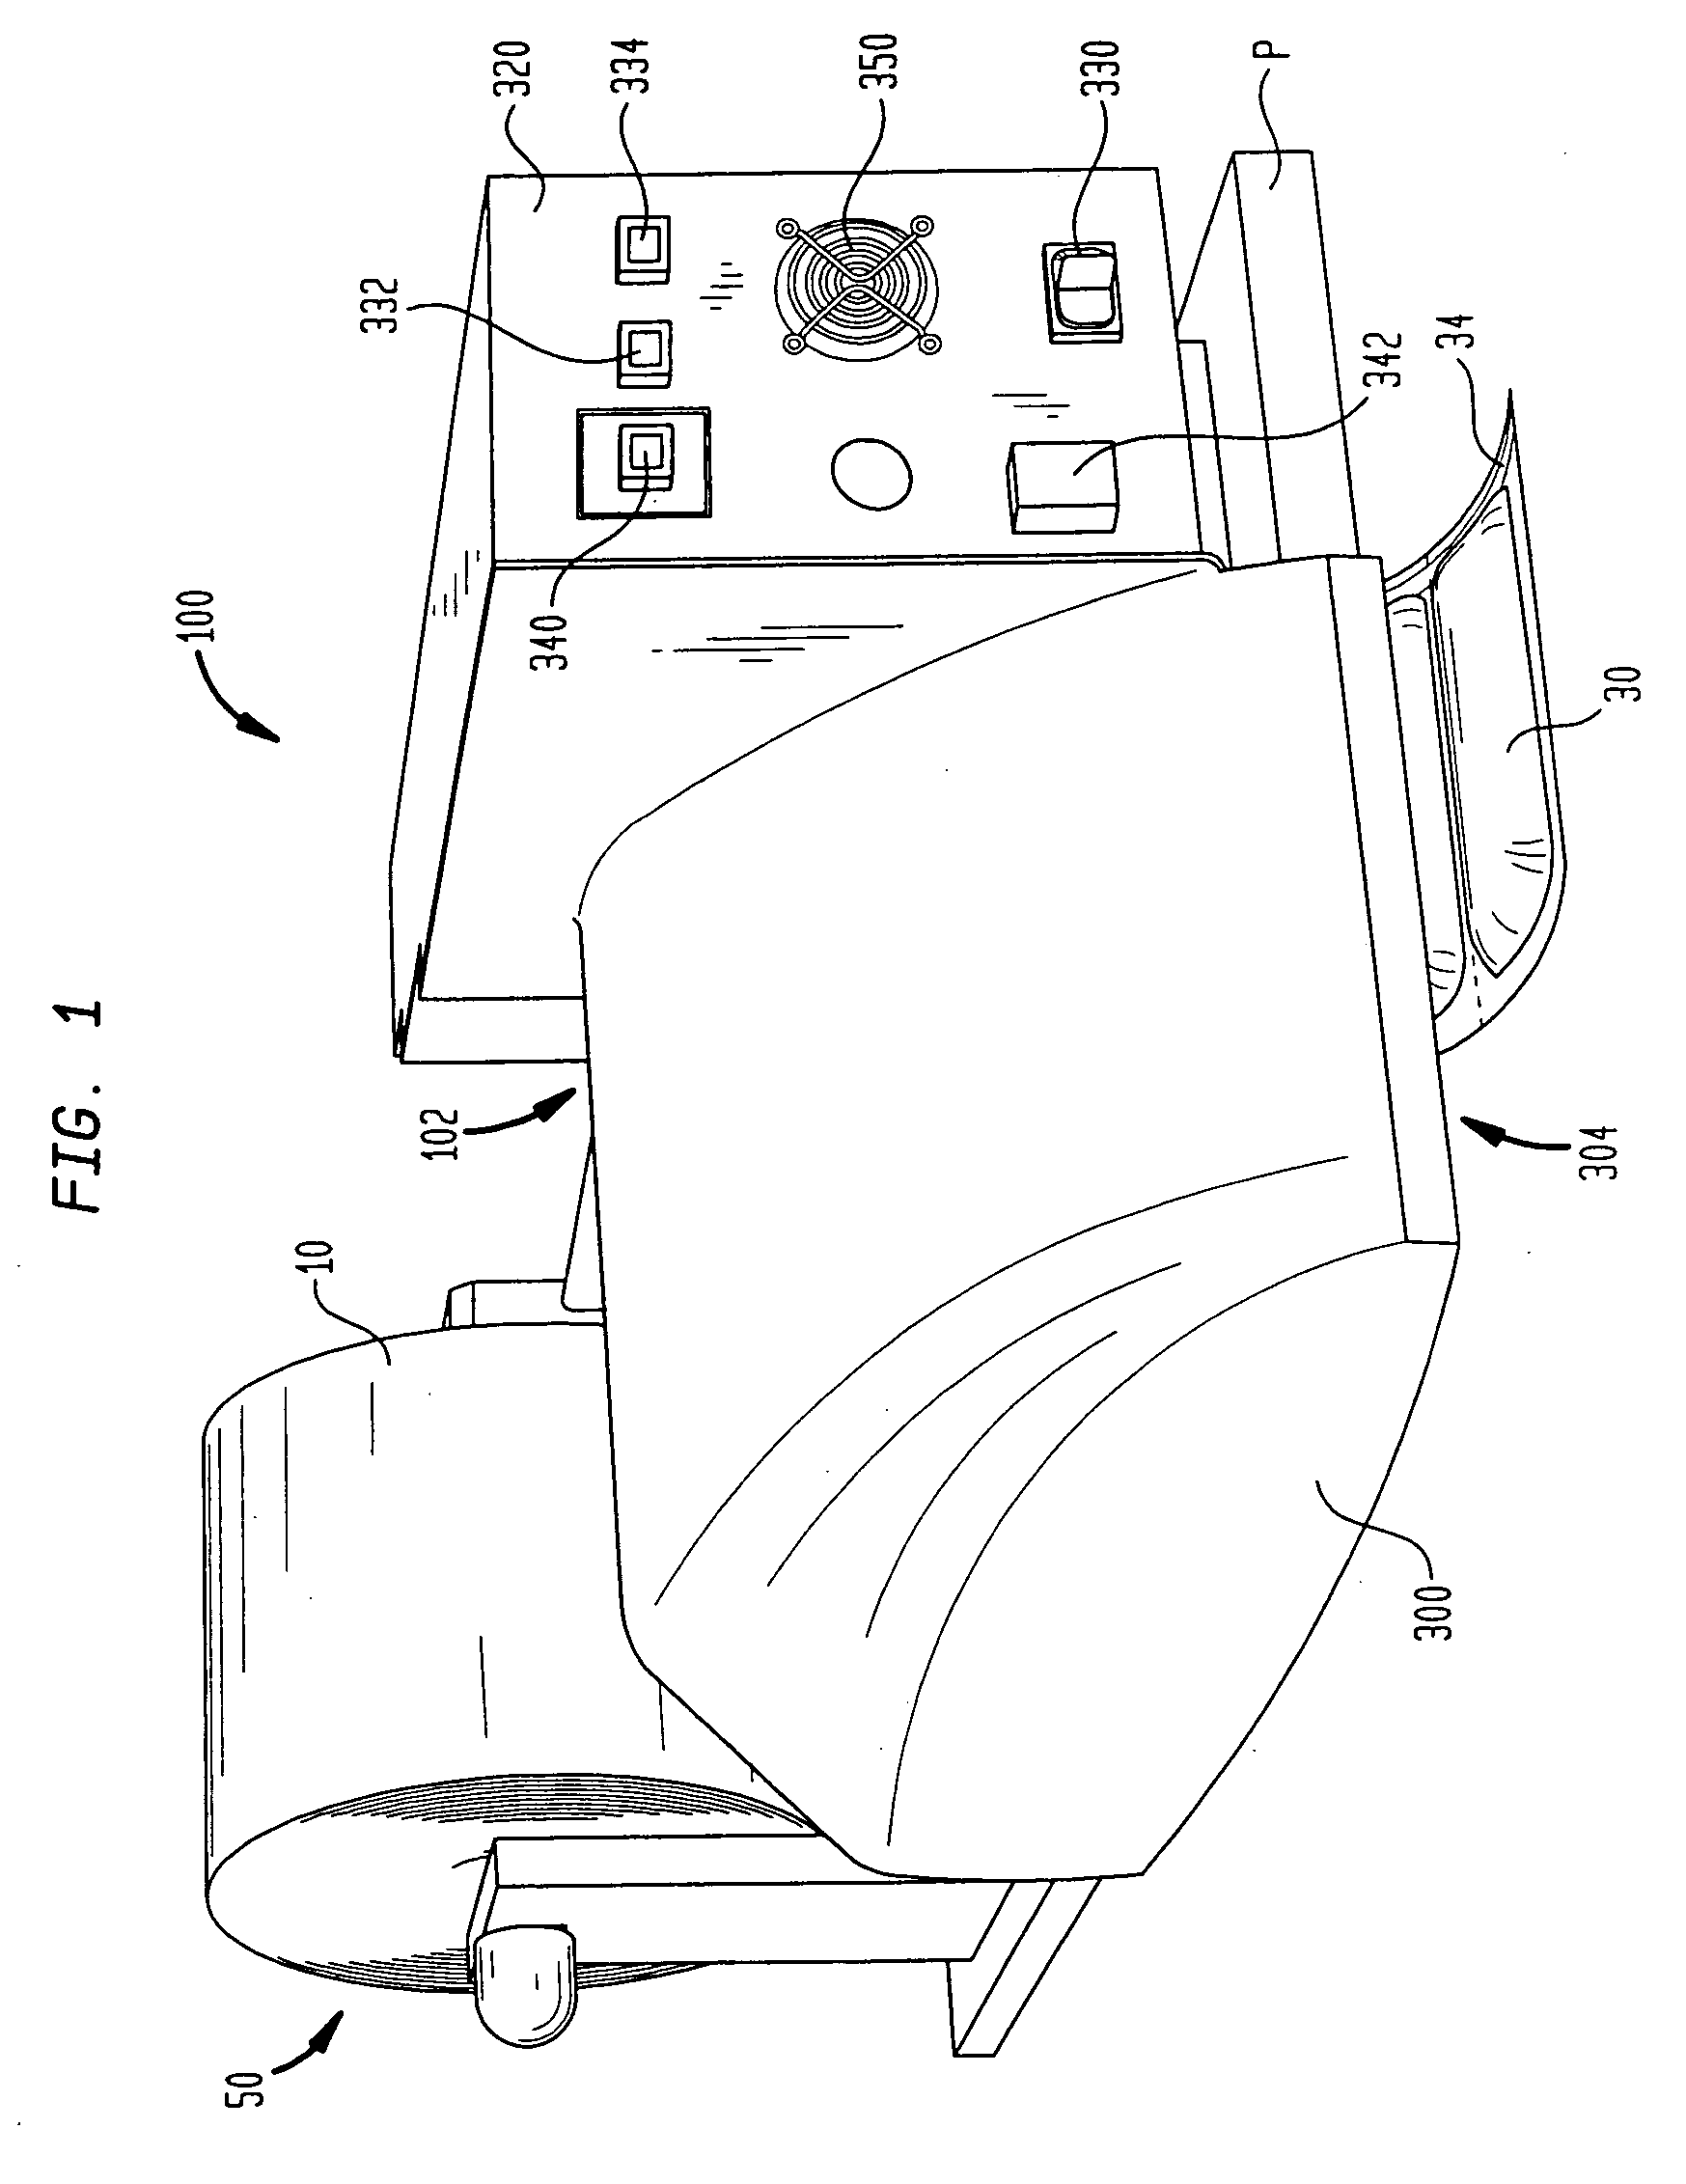 Apparatus for forming inflated packaging cushions